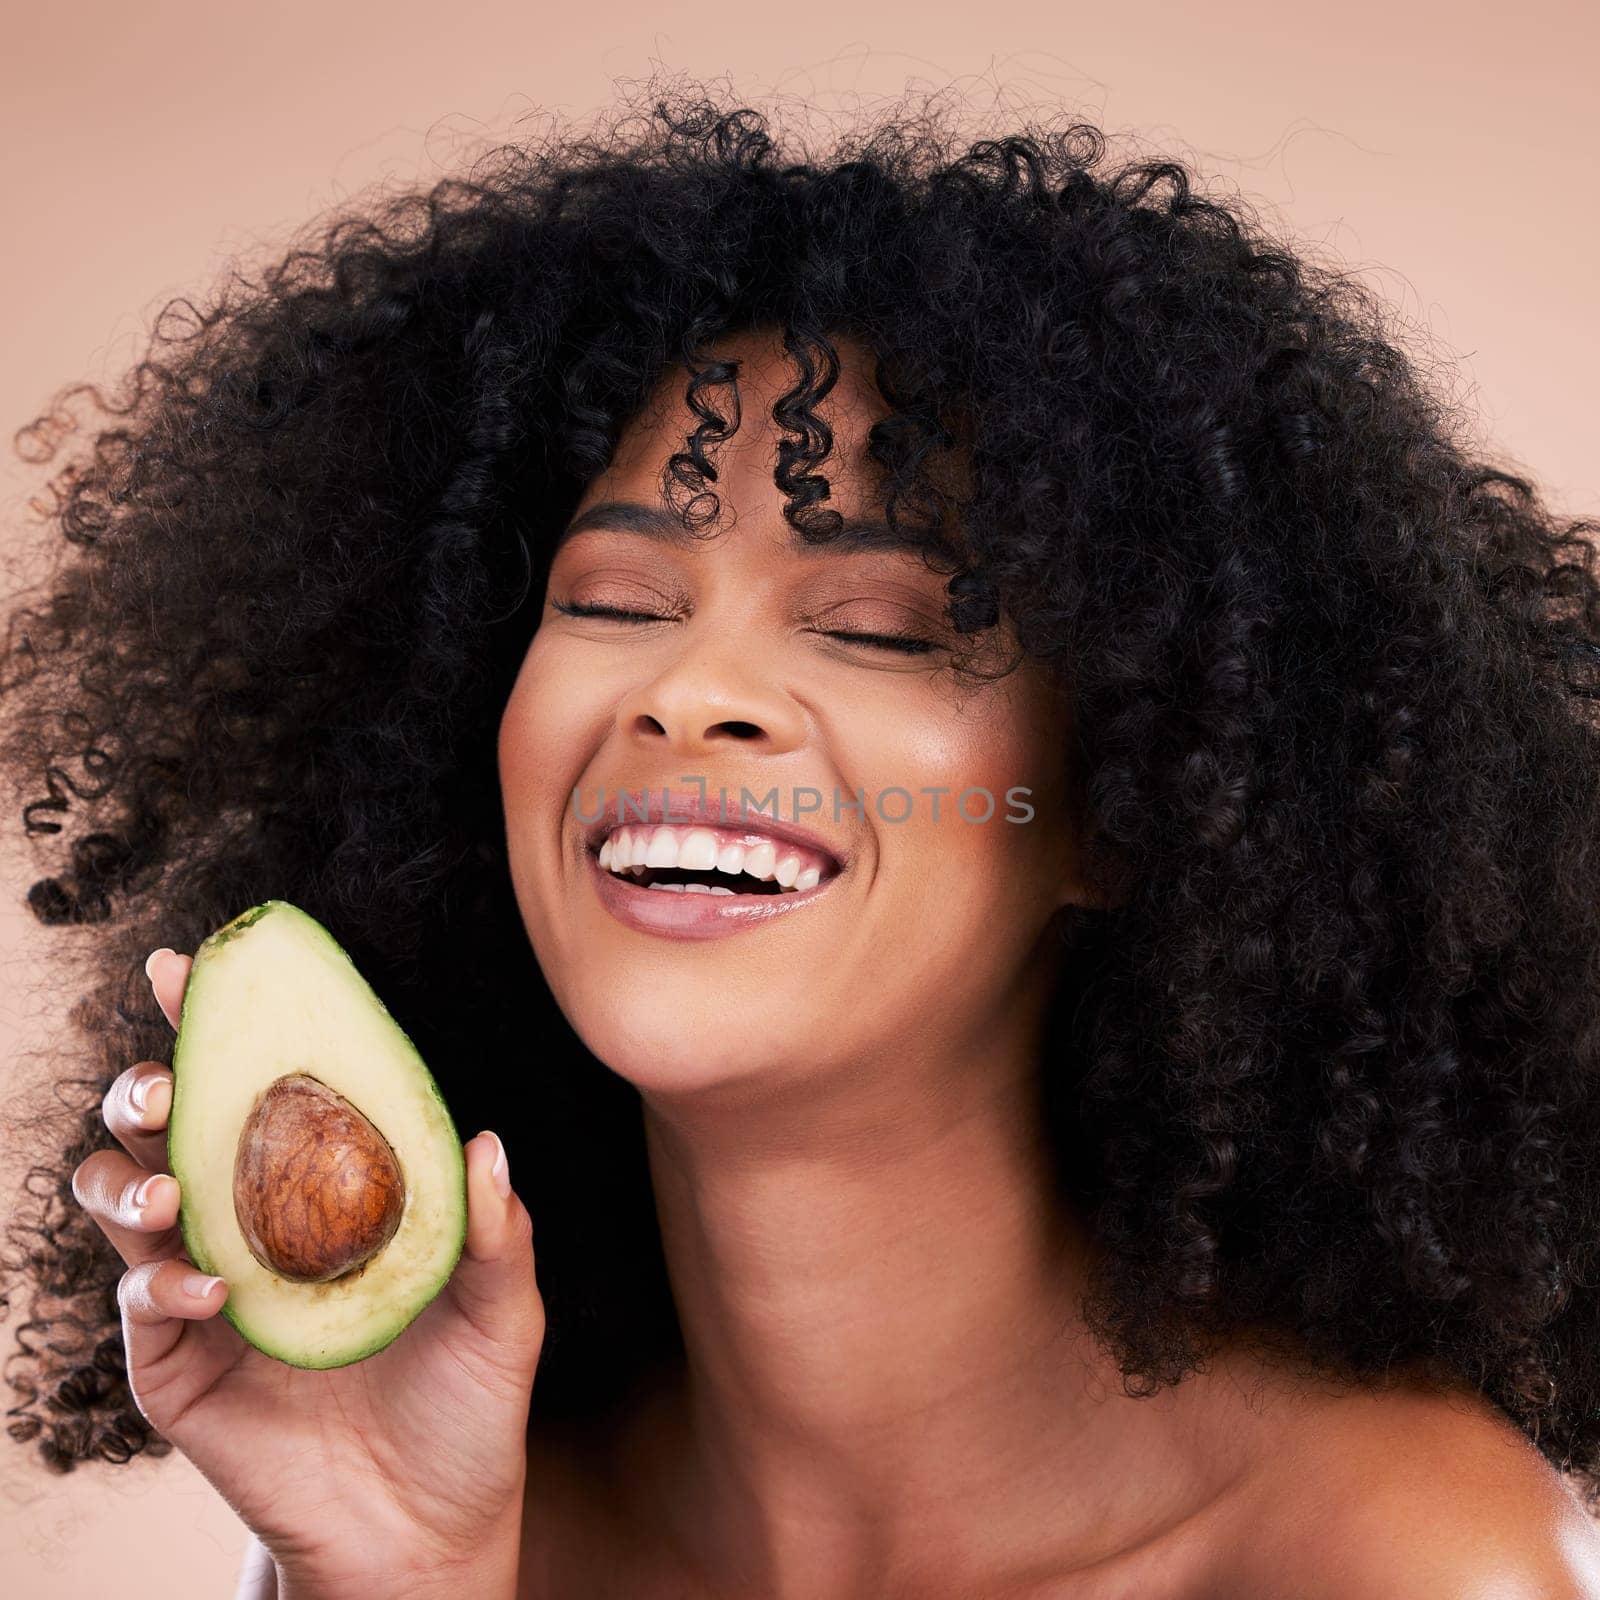 Black woman, studio and avocado for beauty, smile and skincare with health, wellness and self care by background. Happy gen z model, african and fruit for natural aesthetic, healthy nutrition or diet.